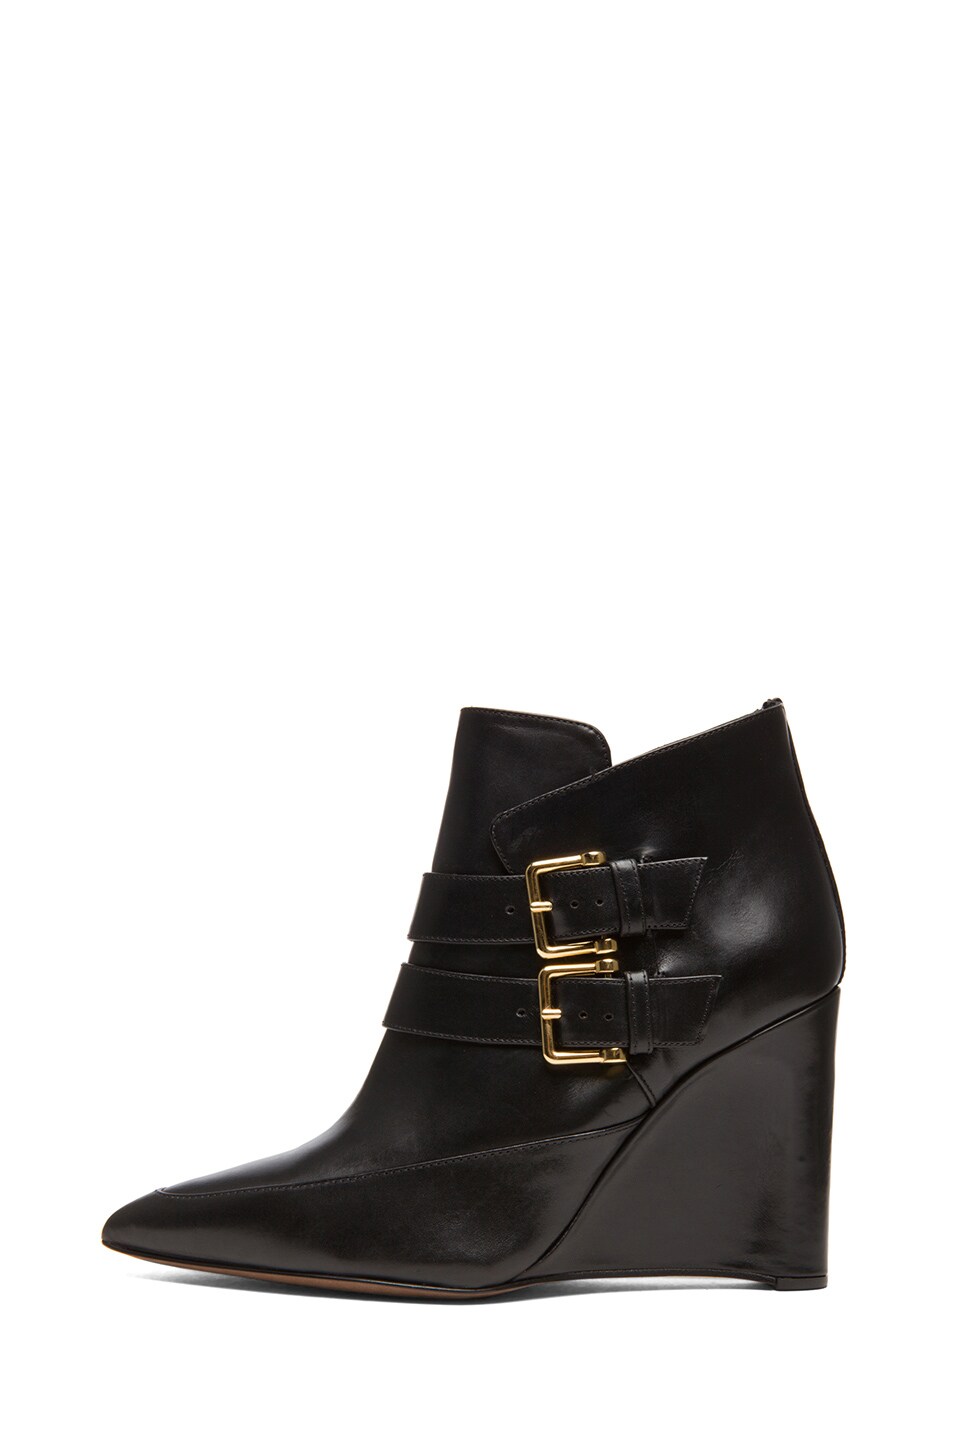 Image 1 of Derek Lam Marta Shiny Calfskin Leather Buckle Ankle Boots in Black